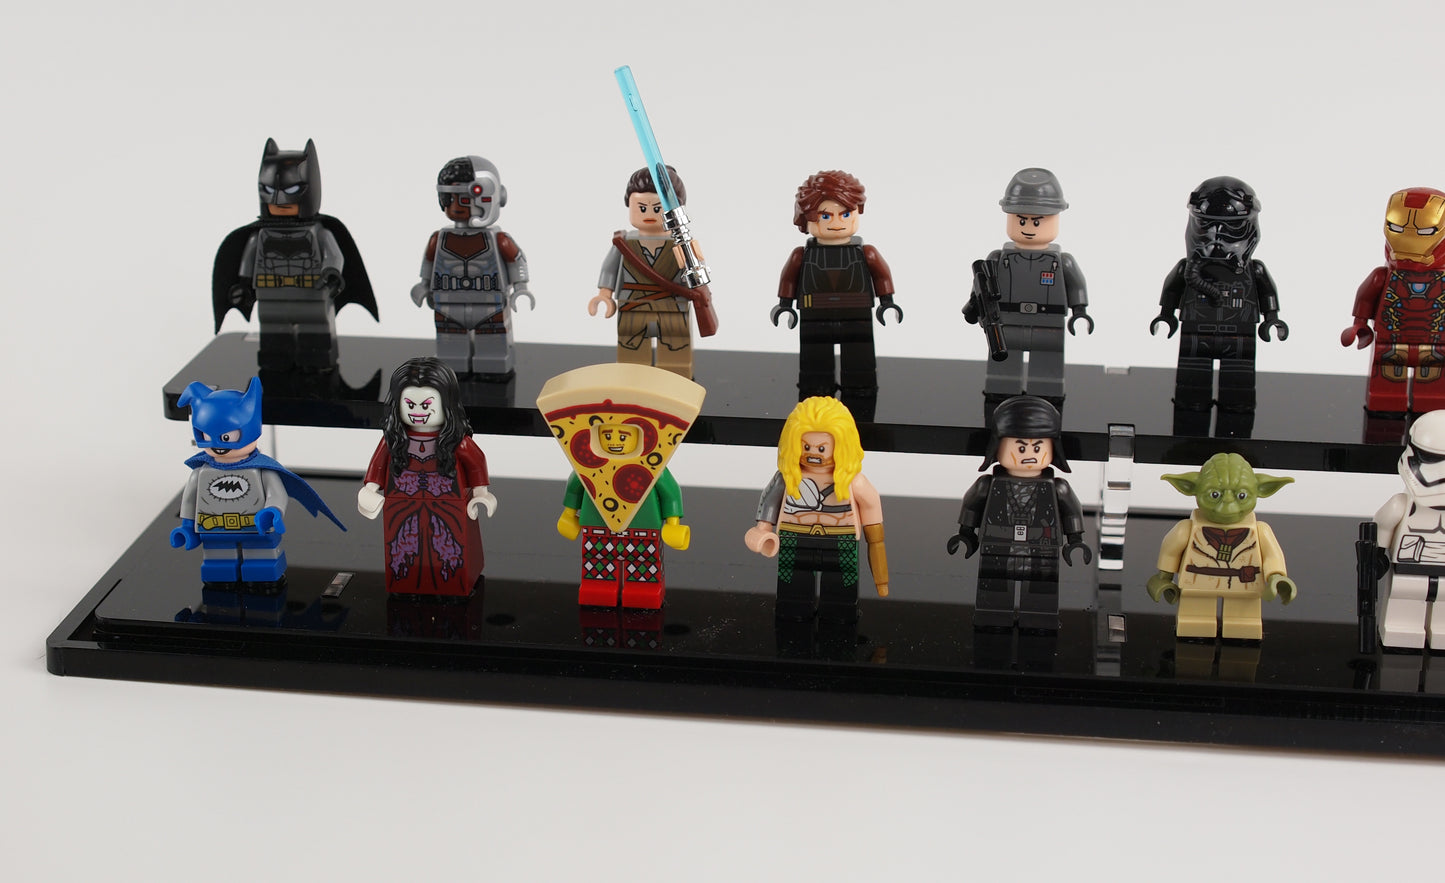 Display Stand For 20 LEGO Minifigures